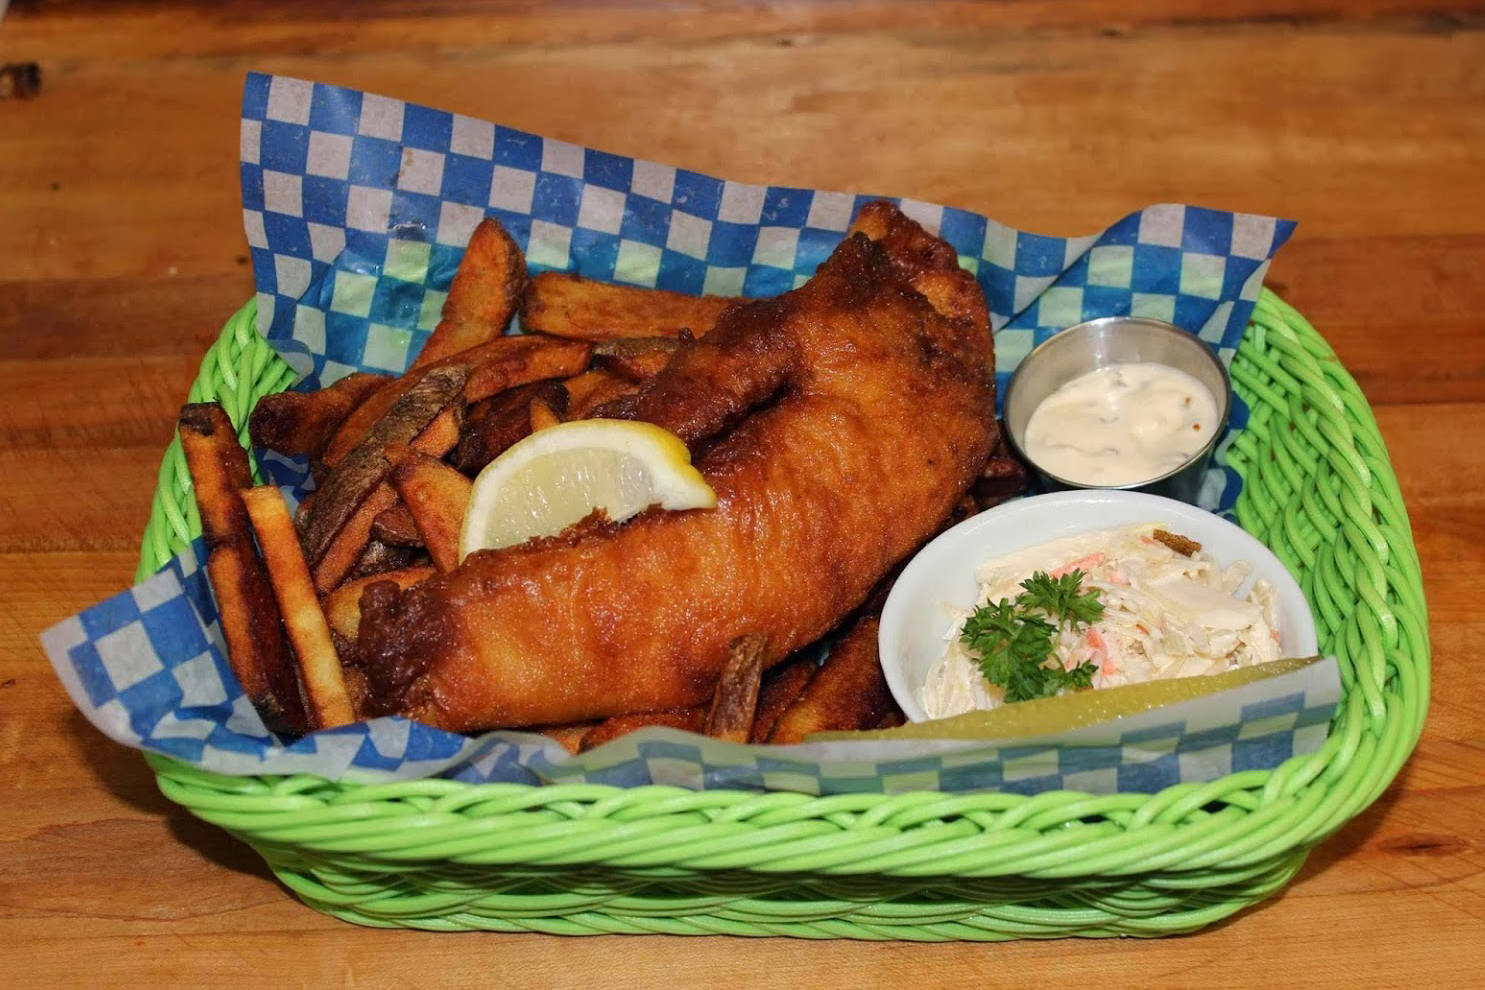 Beer-battered fish and chips by Cat's Fish & Chips.